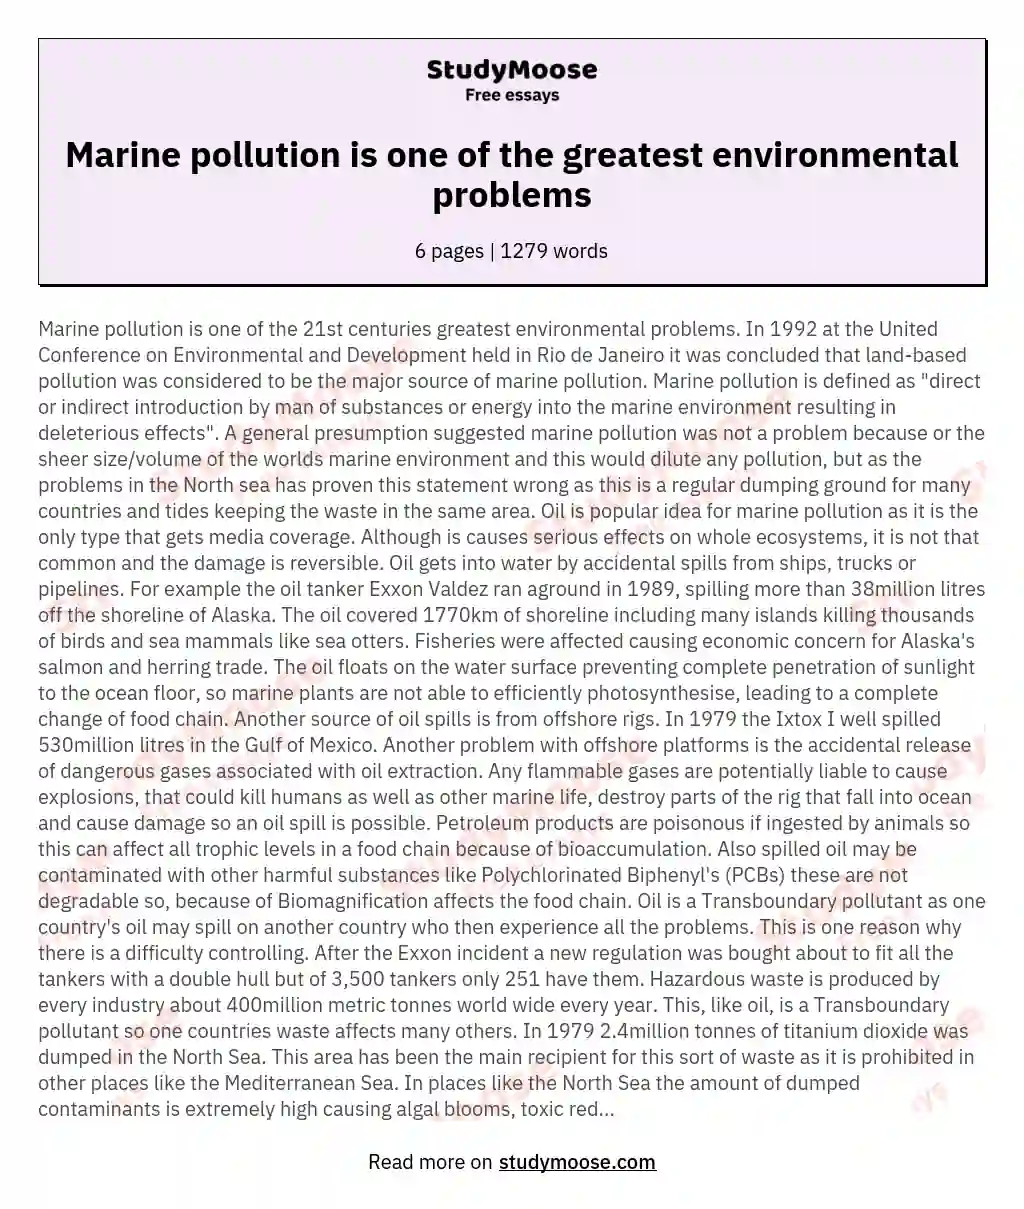 Marine pollution is one of the greatest environmental problems essay